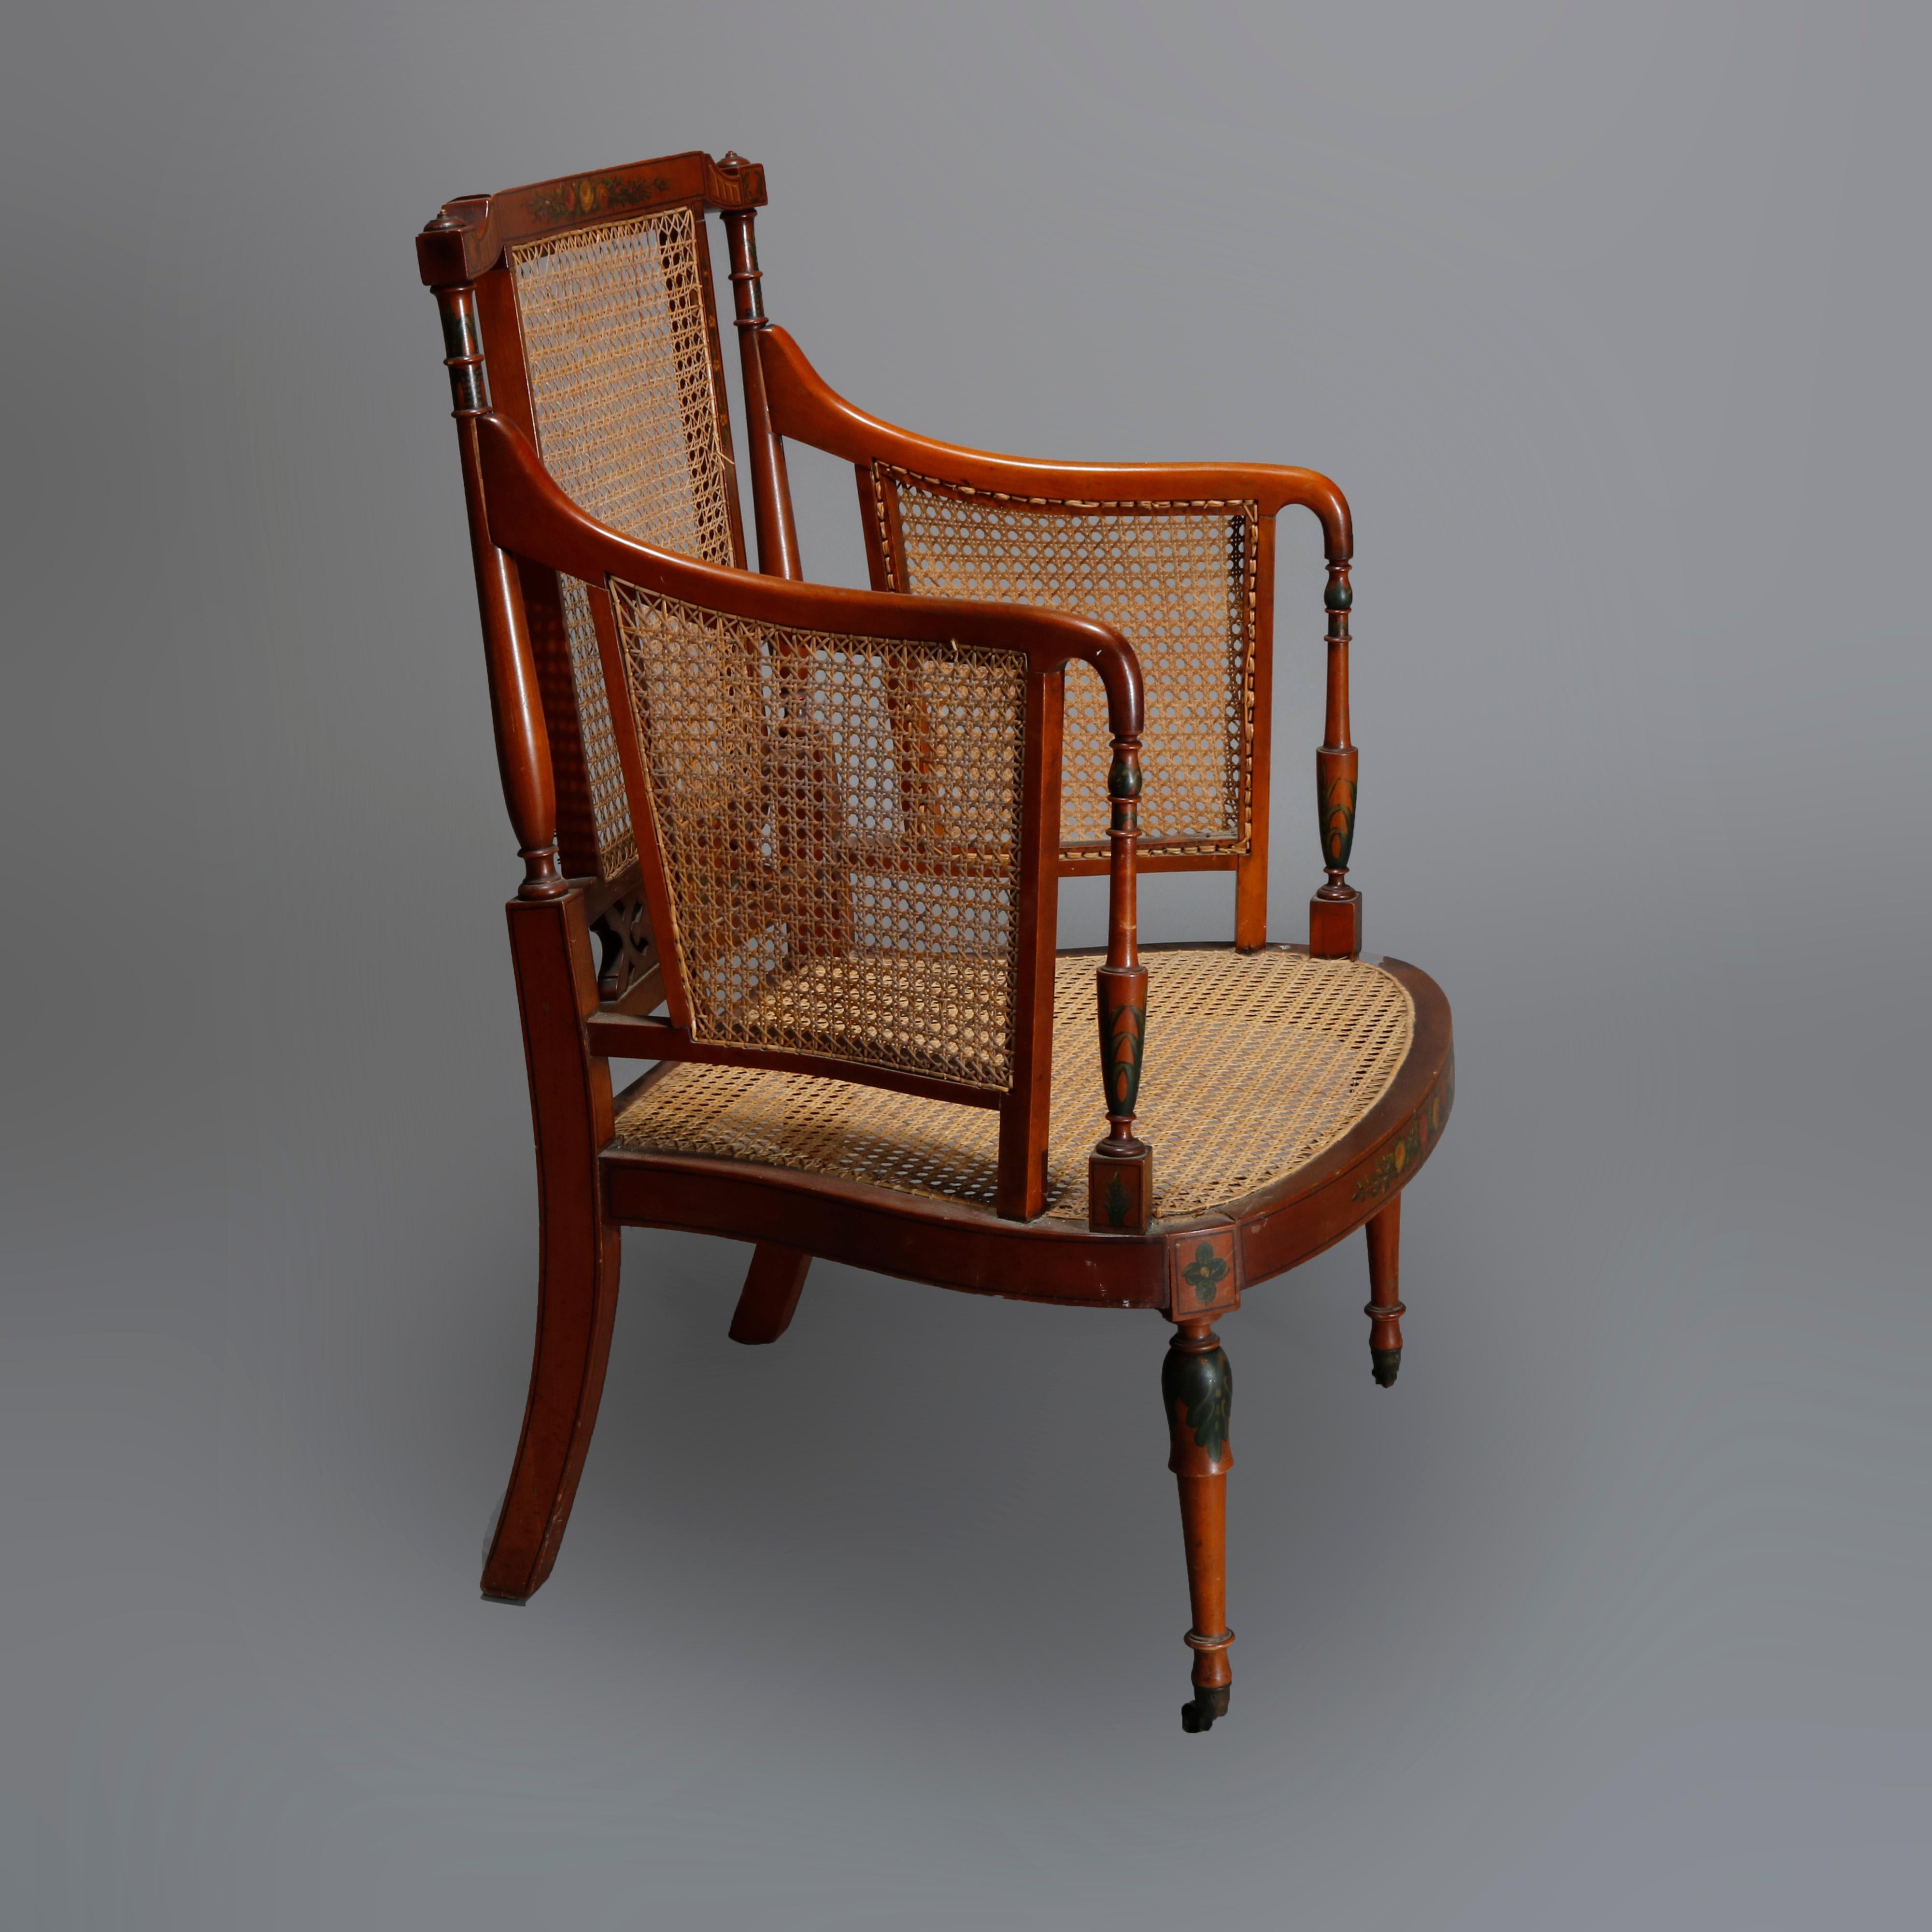 Carved Antique Adams Decorated Satinwood & Cane Lolling Chair, 20th C For Sale